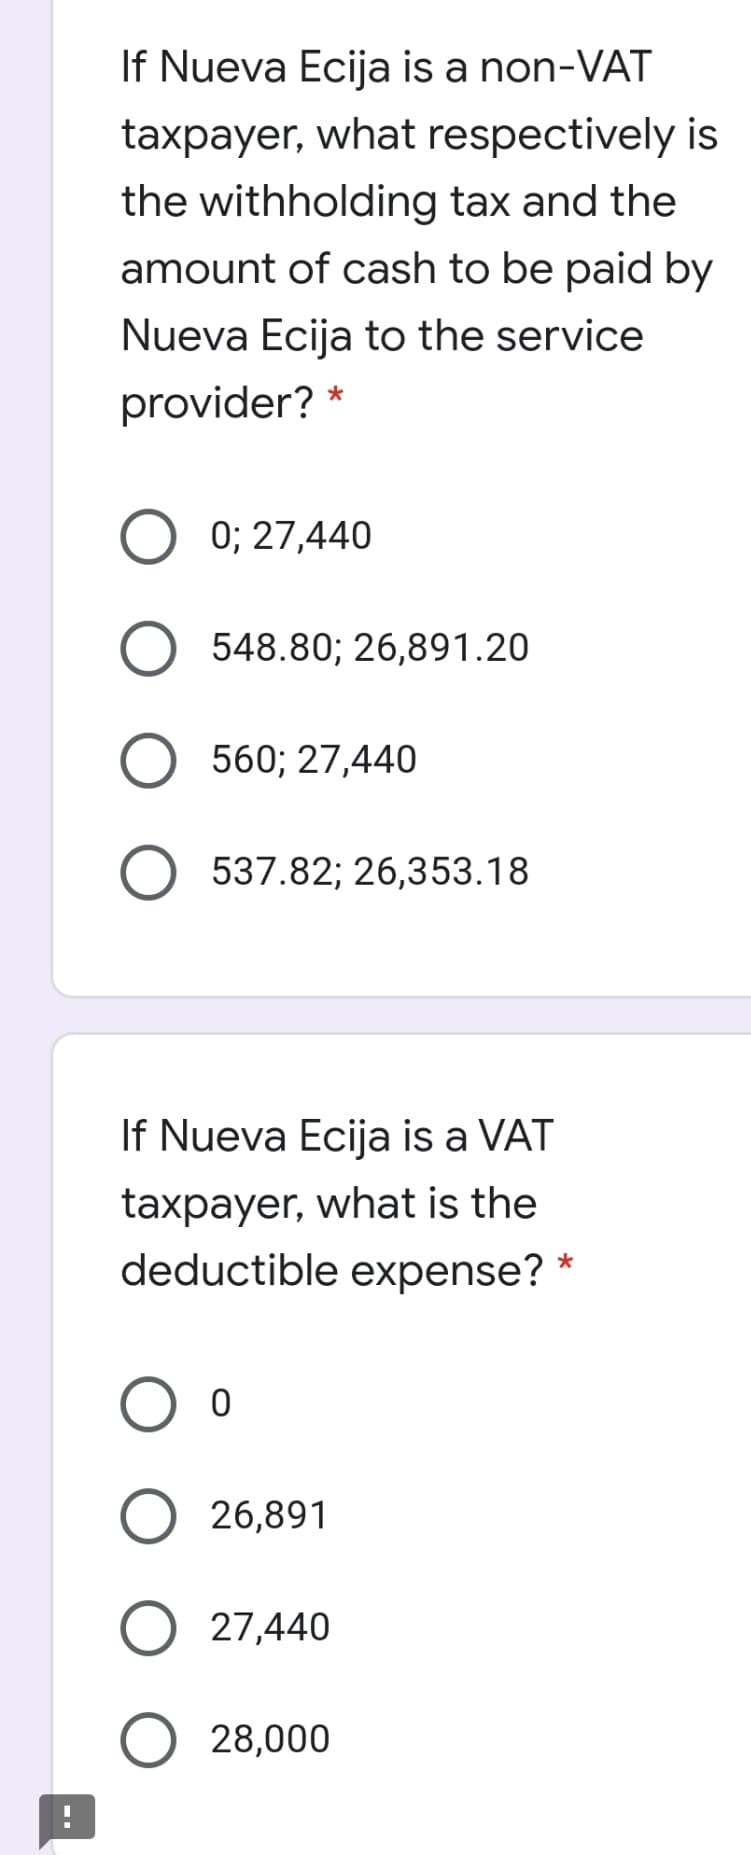 If Nueva Ecija is a non-VAT
taxpayer, what respectively is
the withholding tax and the
amount of cash to be paid by
Nueva Ecija to the service
provider? *
0; 27,440
548.80; 26,891.20
560; 27,440
537.82; 26,353.18
If Nueva Ecija is a VAT
taxpayer, what is the
deductible expense?
26,891
27,440
28,000
